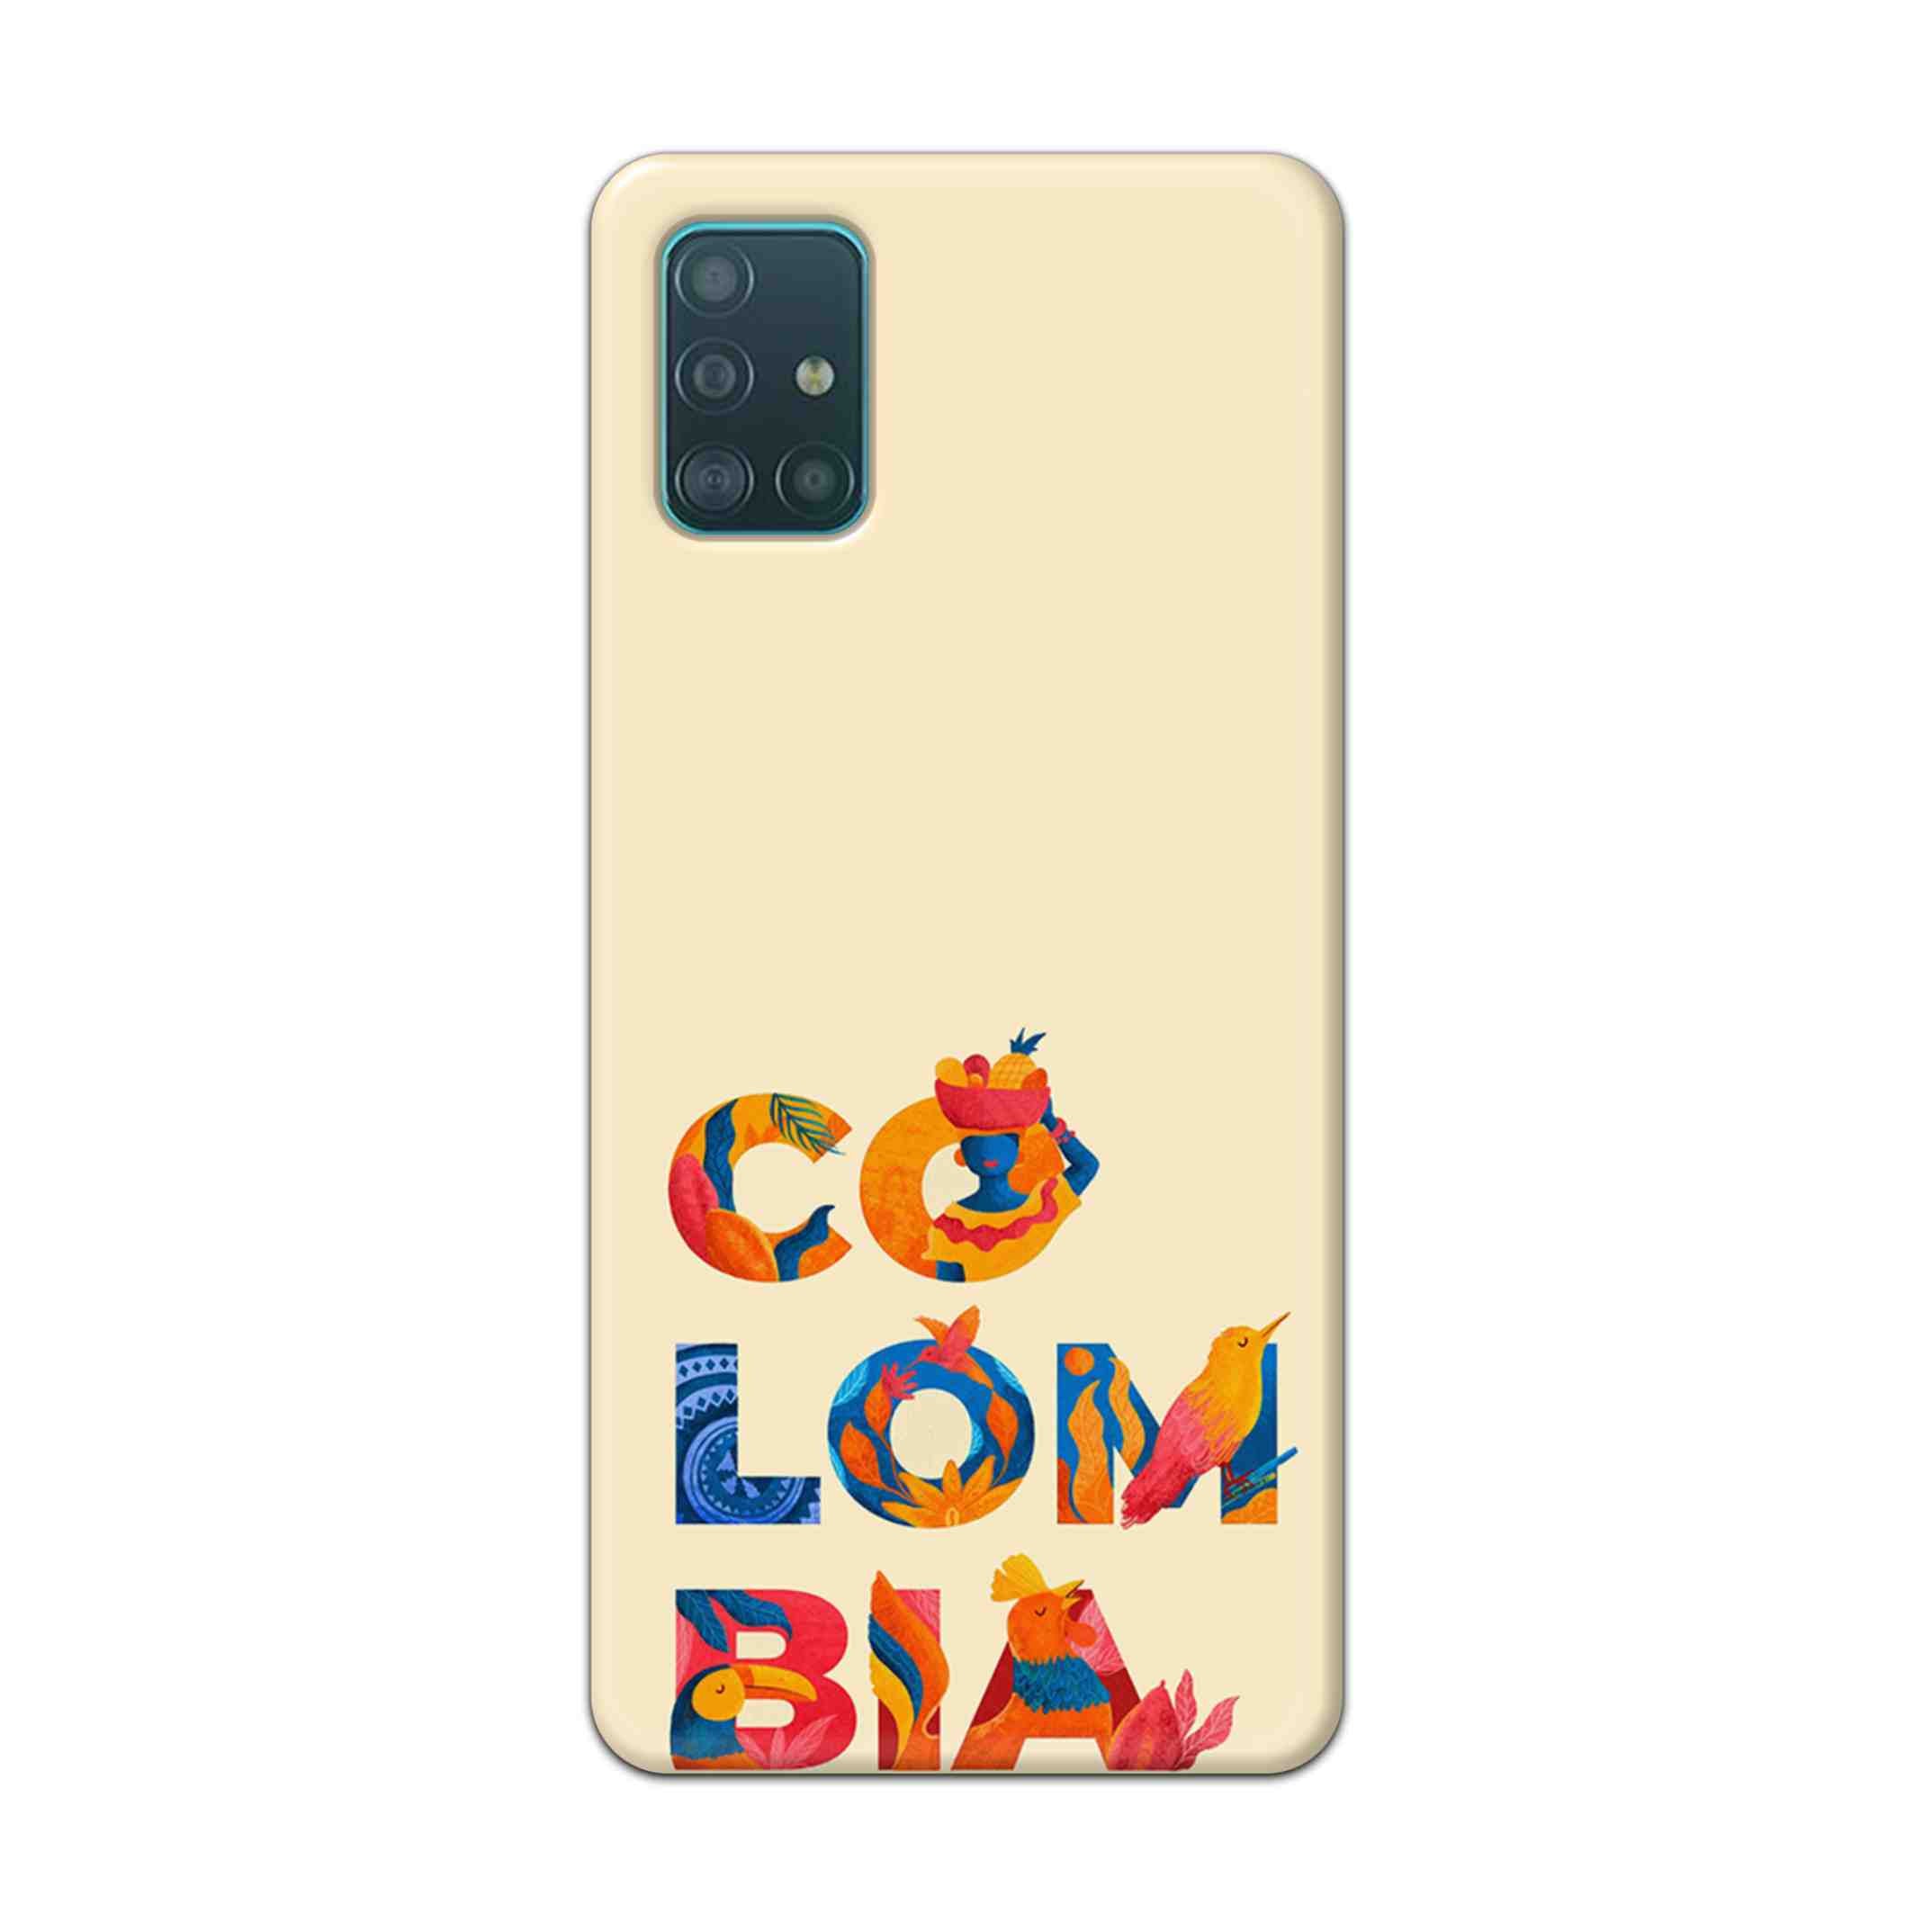 Buy Colombia Hard Back Mobile Phone Case Cover For Samsung A51 Online